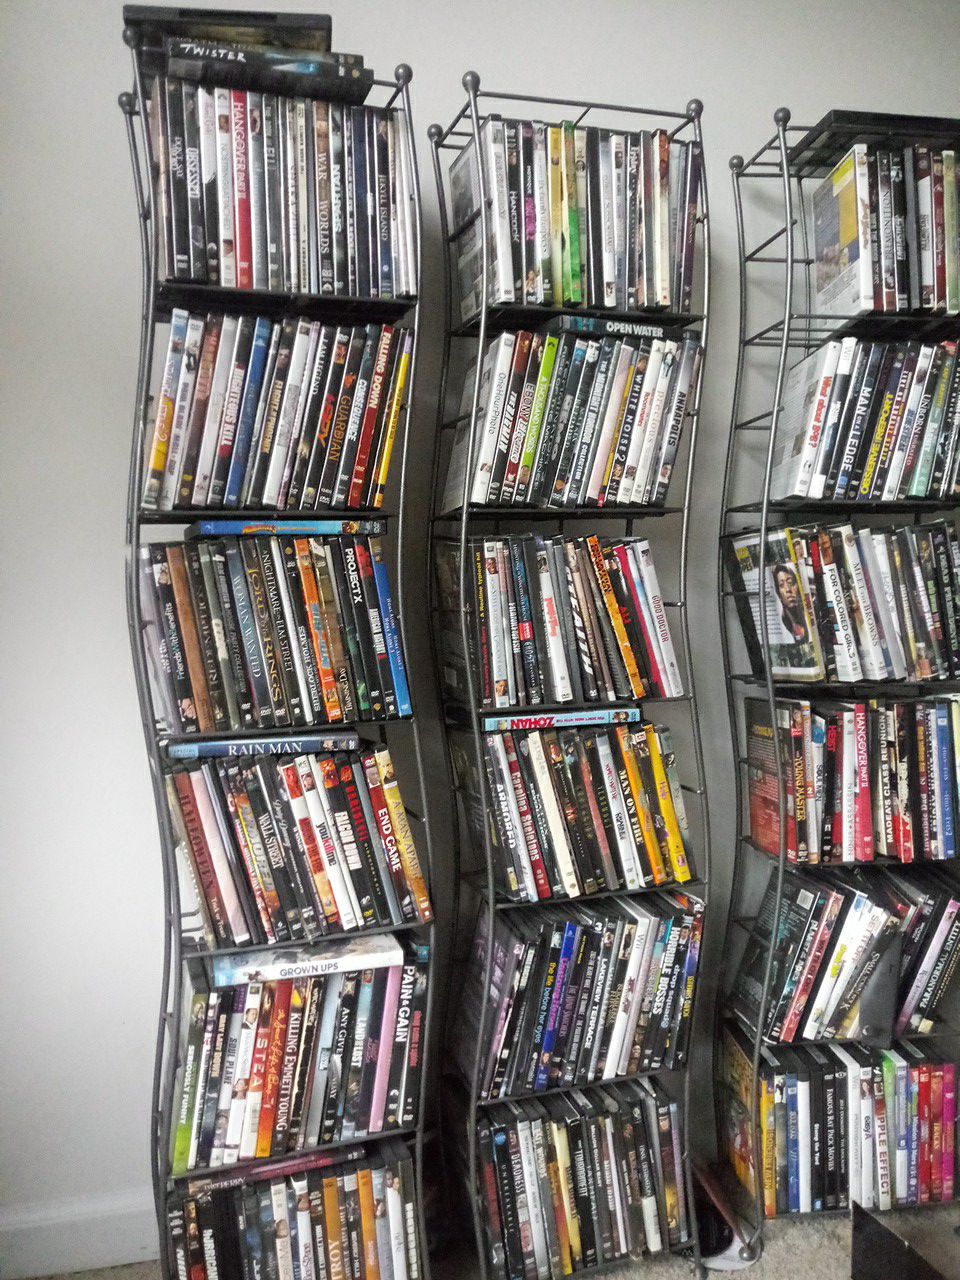 Over 200 movies